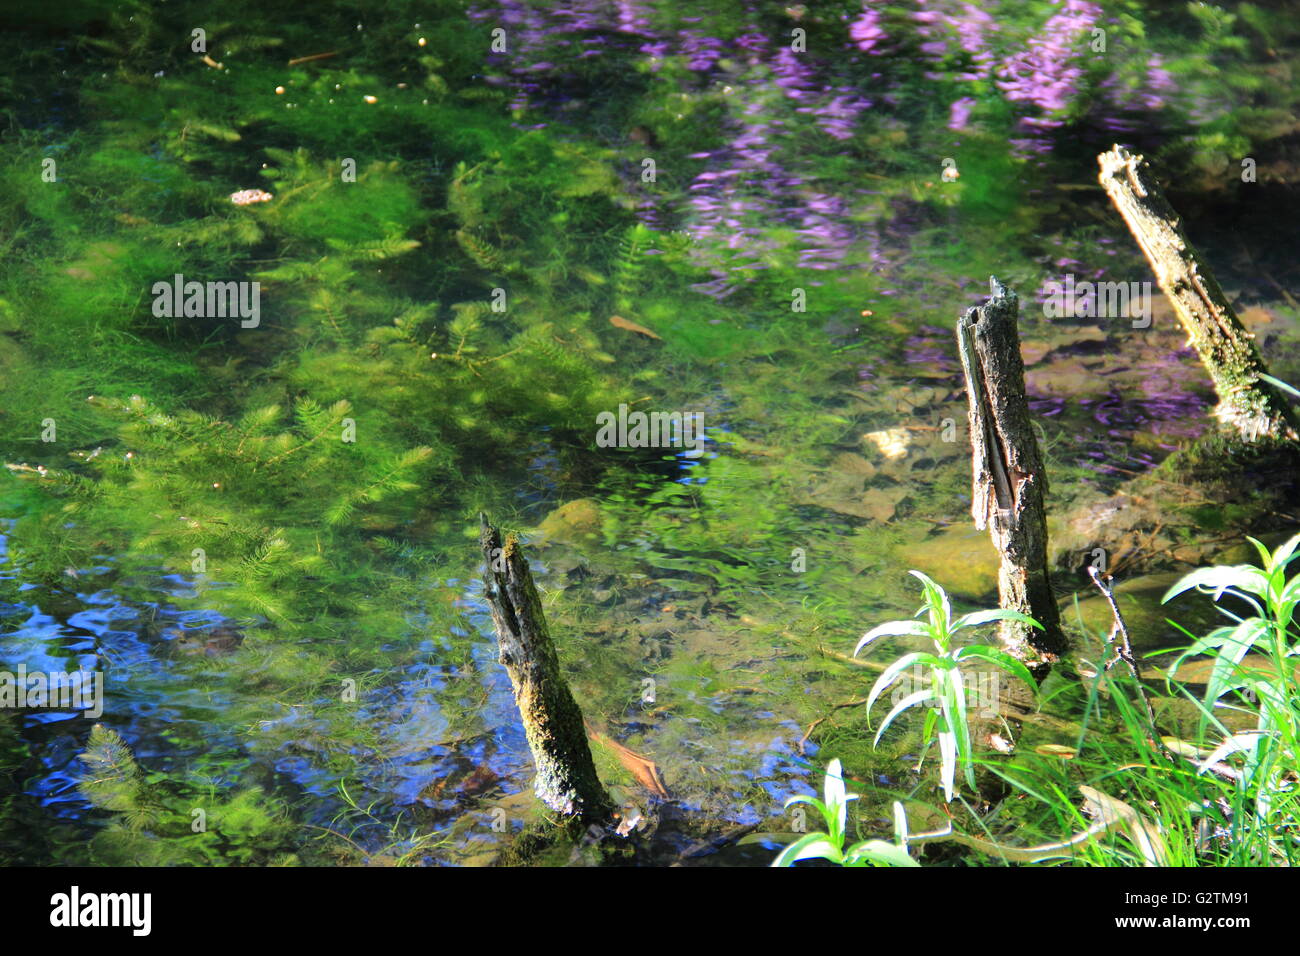 Colorful pond, pollywogs and reflections at graveyard Ohlsdorf Hamburg Germany Stock Photo